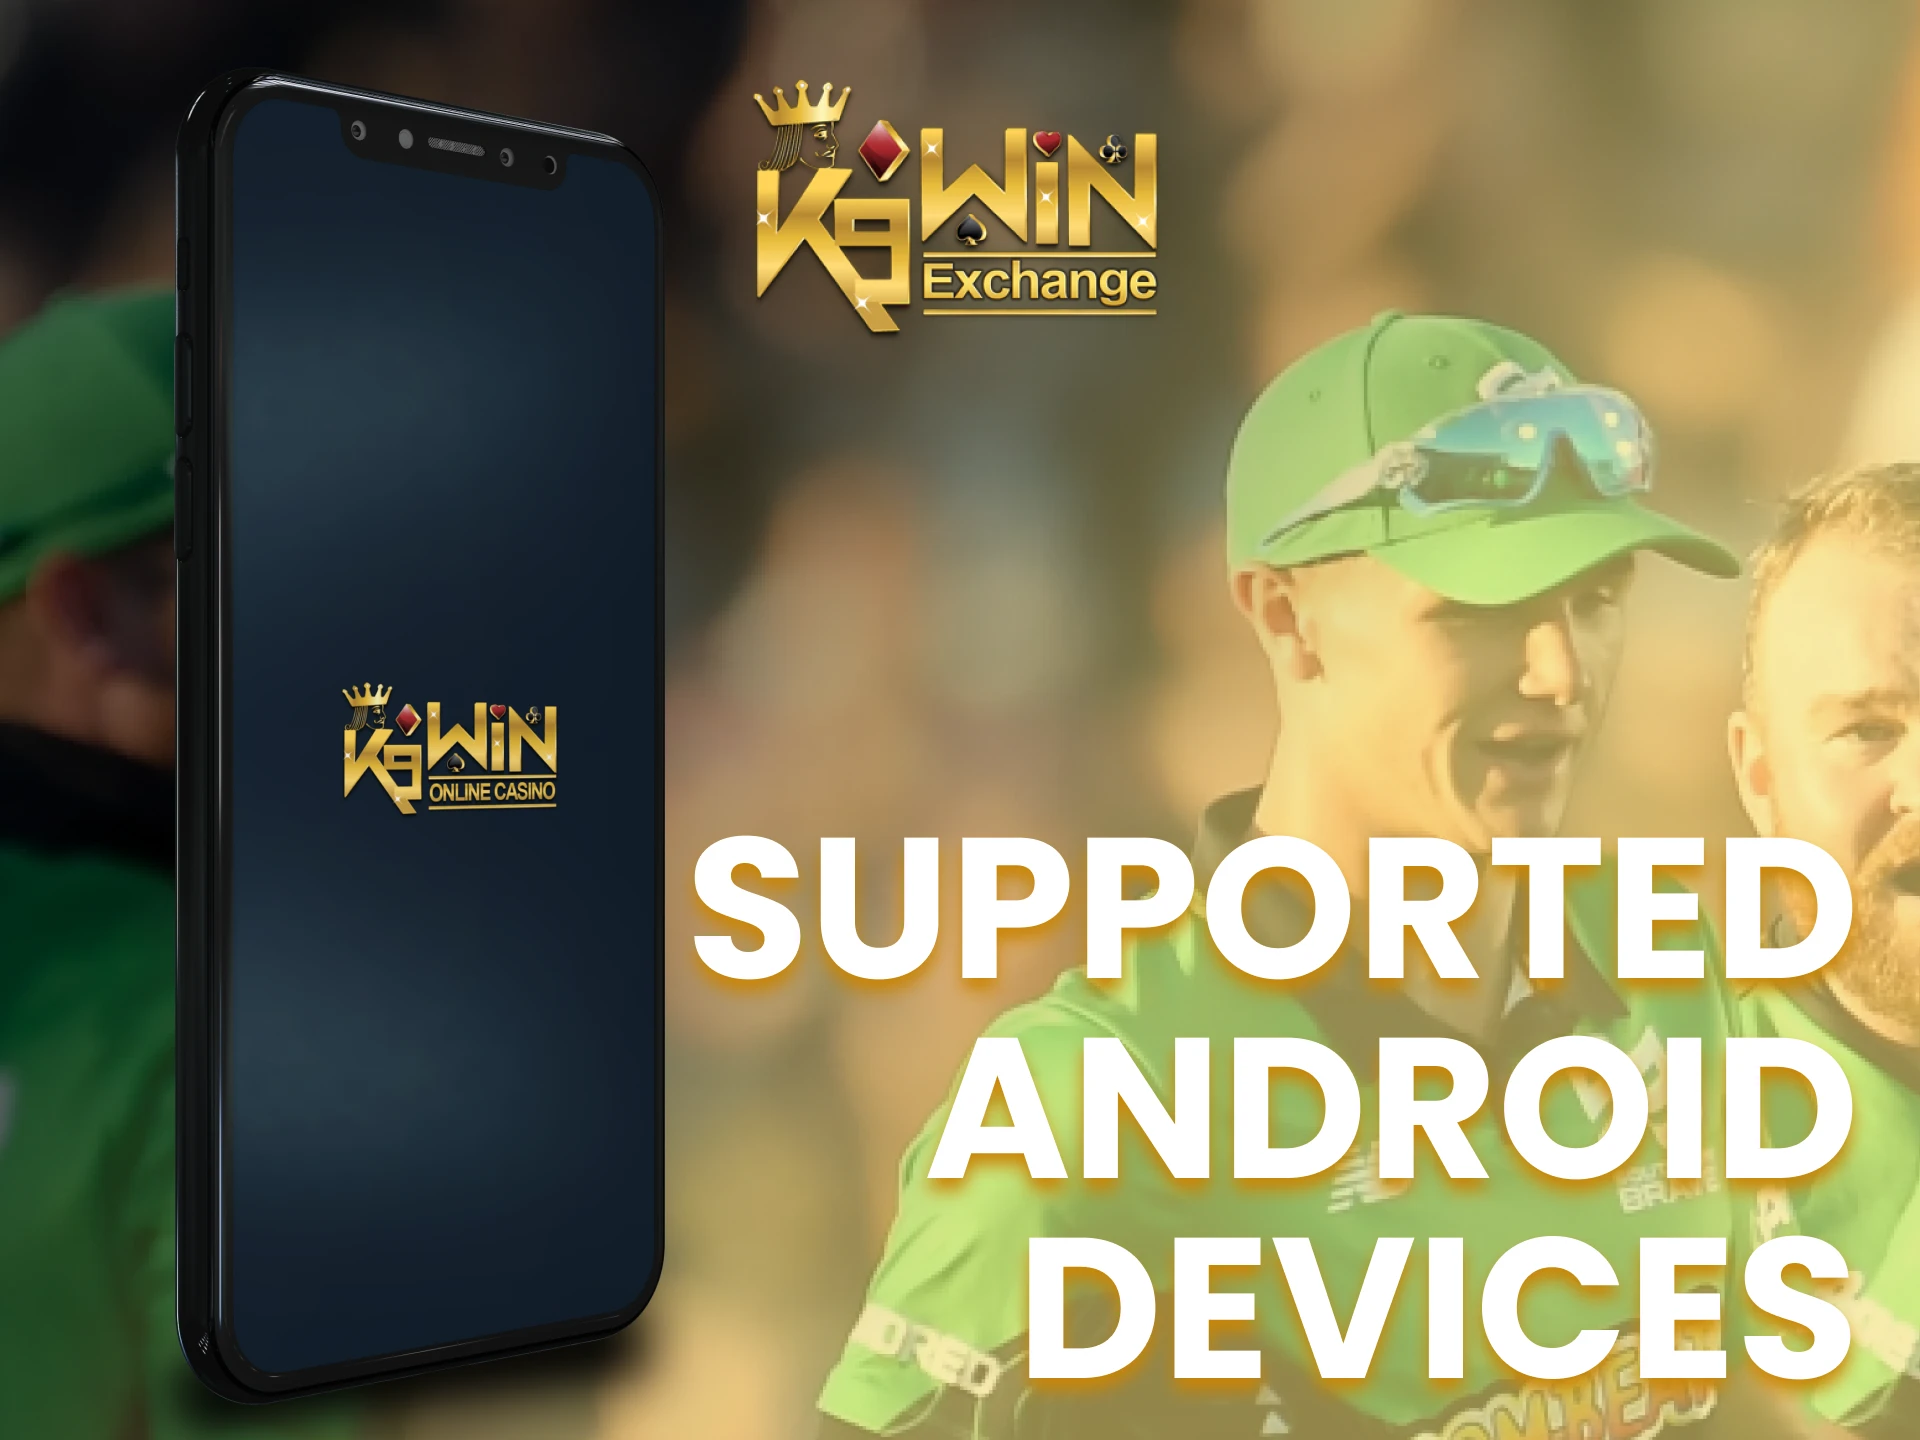 K9Win Android app supports many devices.